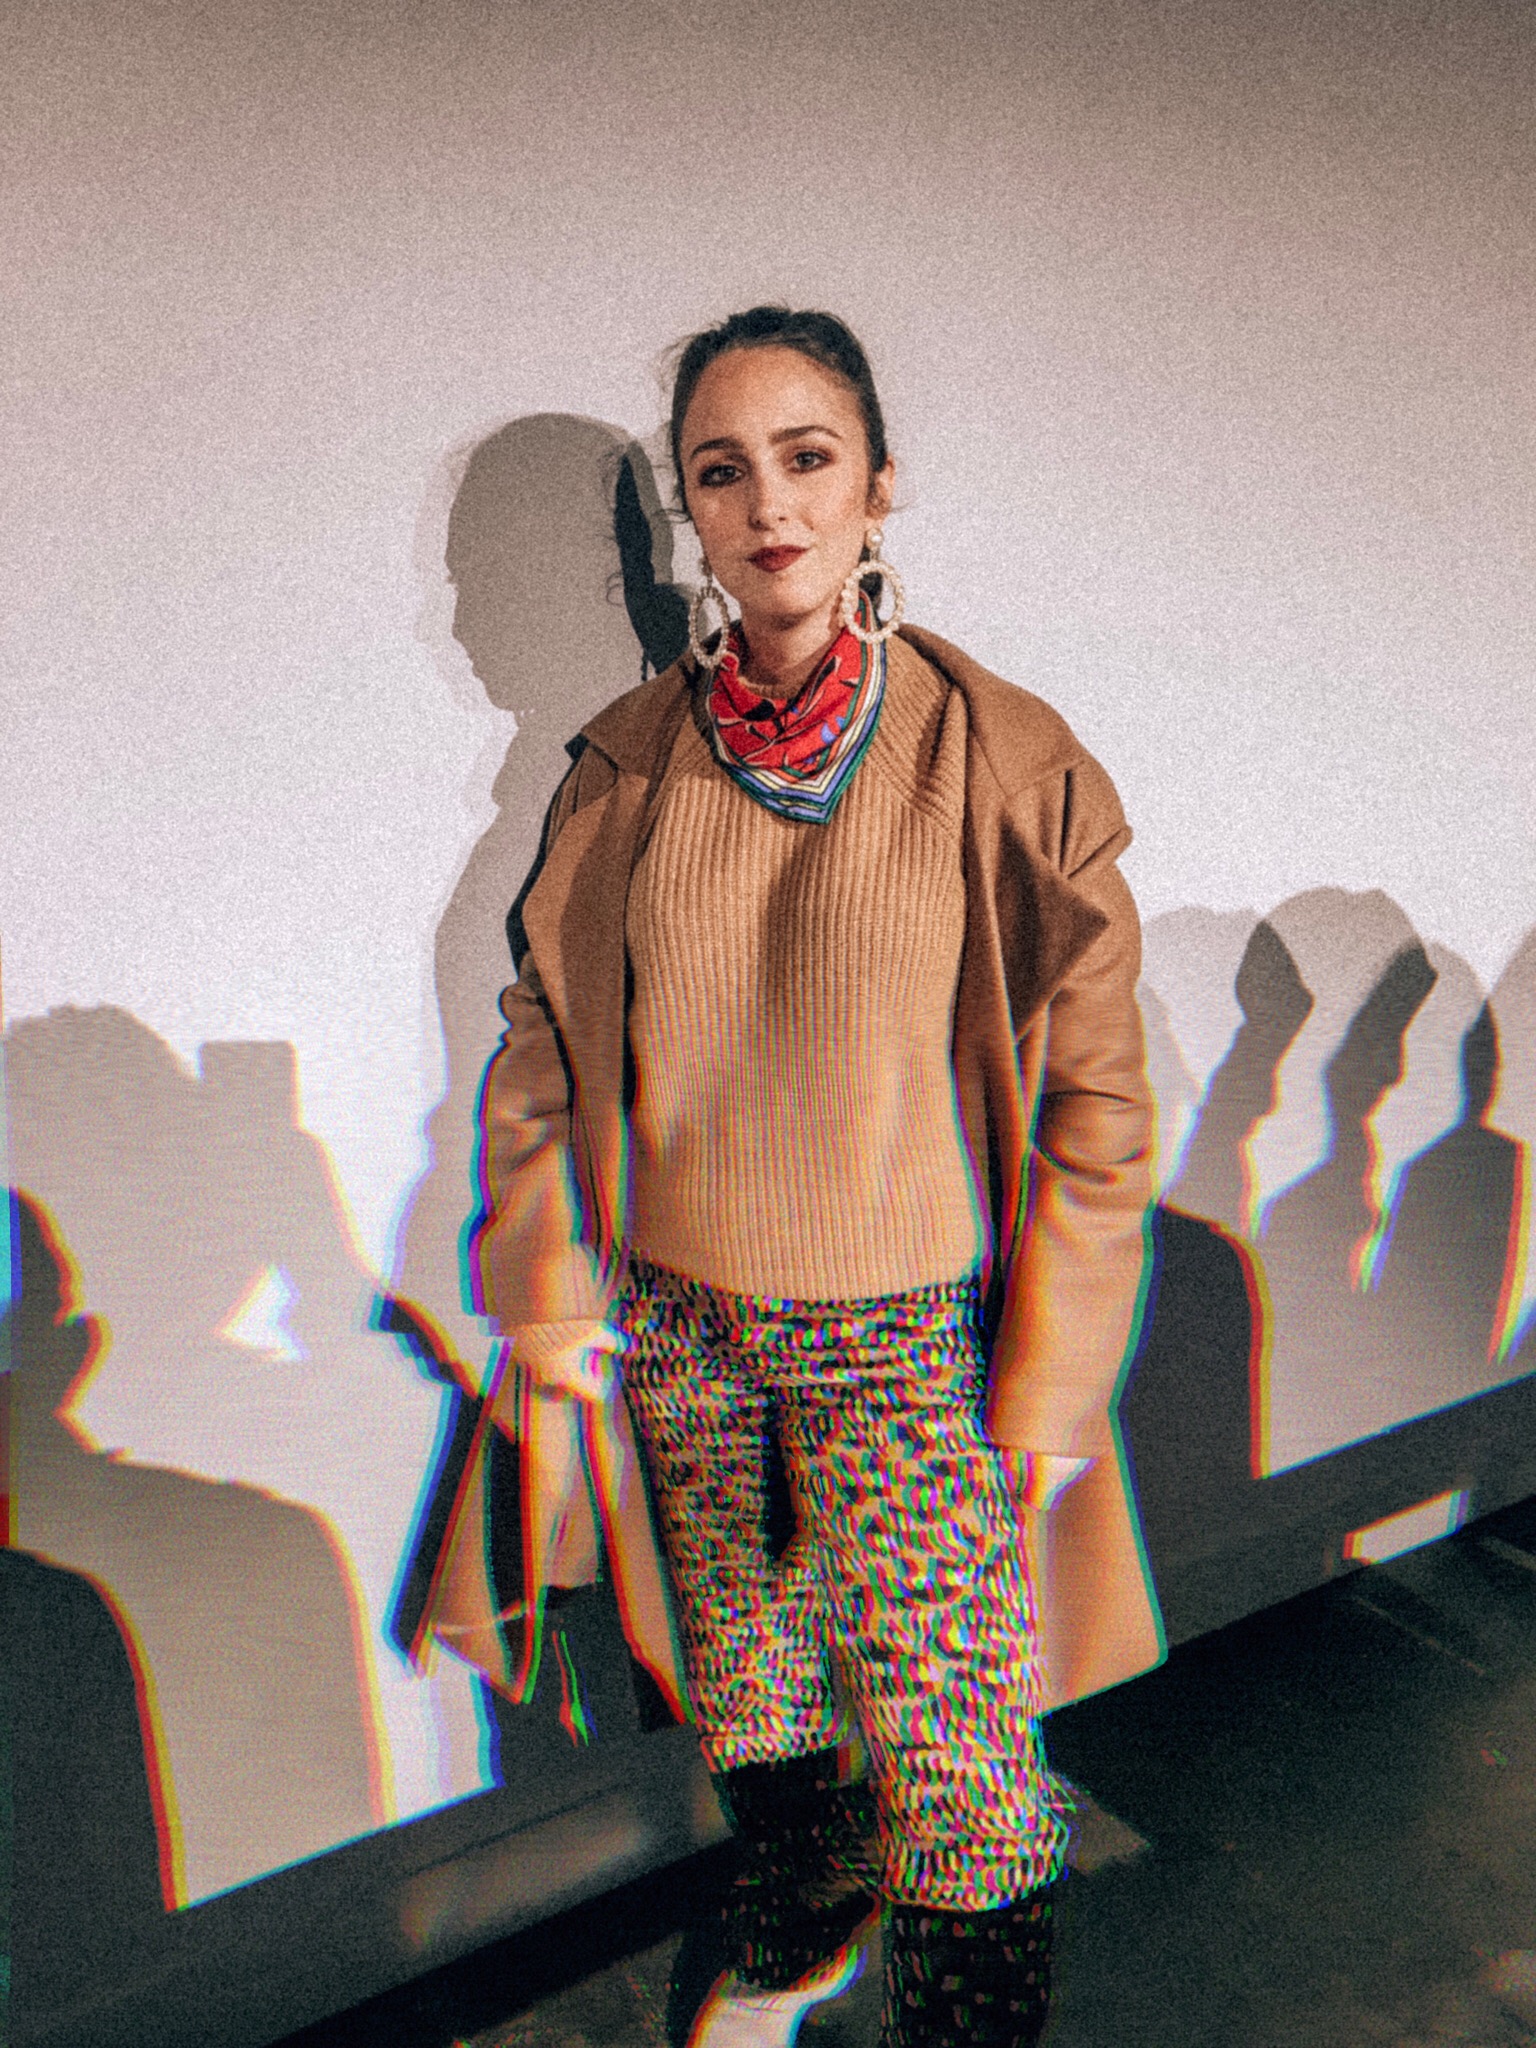 NYFW FW 2019 Recap-Fall Winter-New York Fashion Week-Blogger-Coverage-Style-Outfit #bloggerstyle #nyfw #outfit #winterstyle #camelcoat #leopard